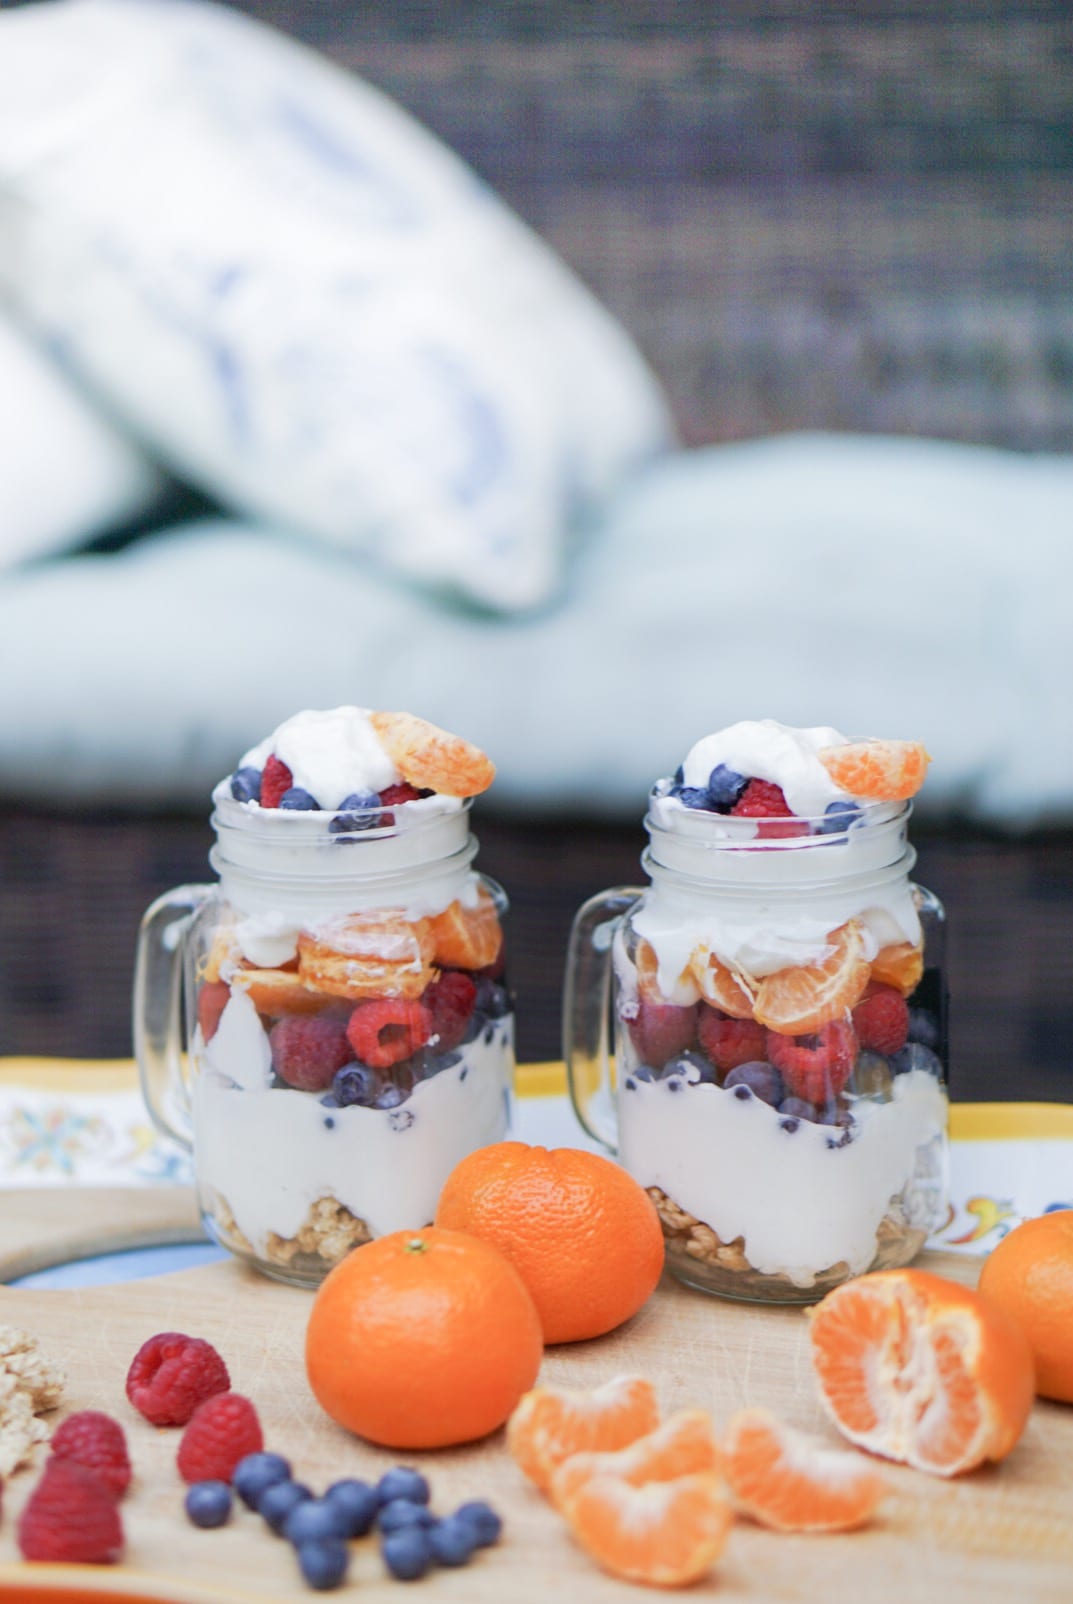 fruit parfait, fruit parfait recipe, easy to make recipe, thanksgiving recipe, recipe to make with kids, dessert, no cook recipe, cuties, #100dayofhappiness, mom and me activities, boy mom, holiday fun, holiday diy, DIY with kids 